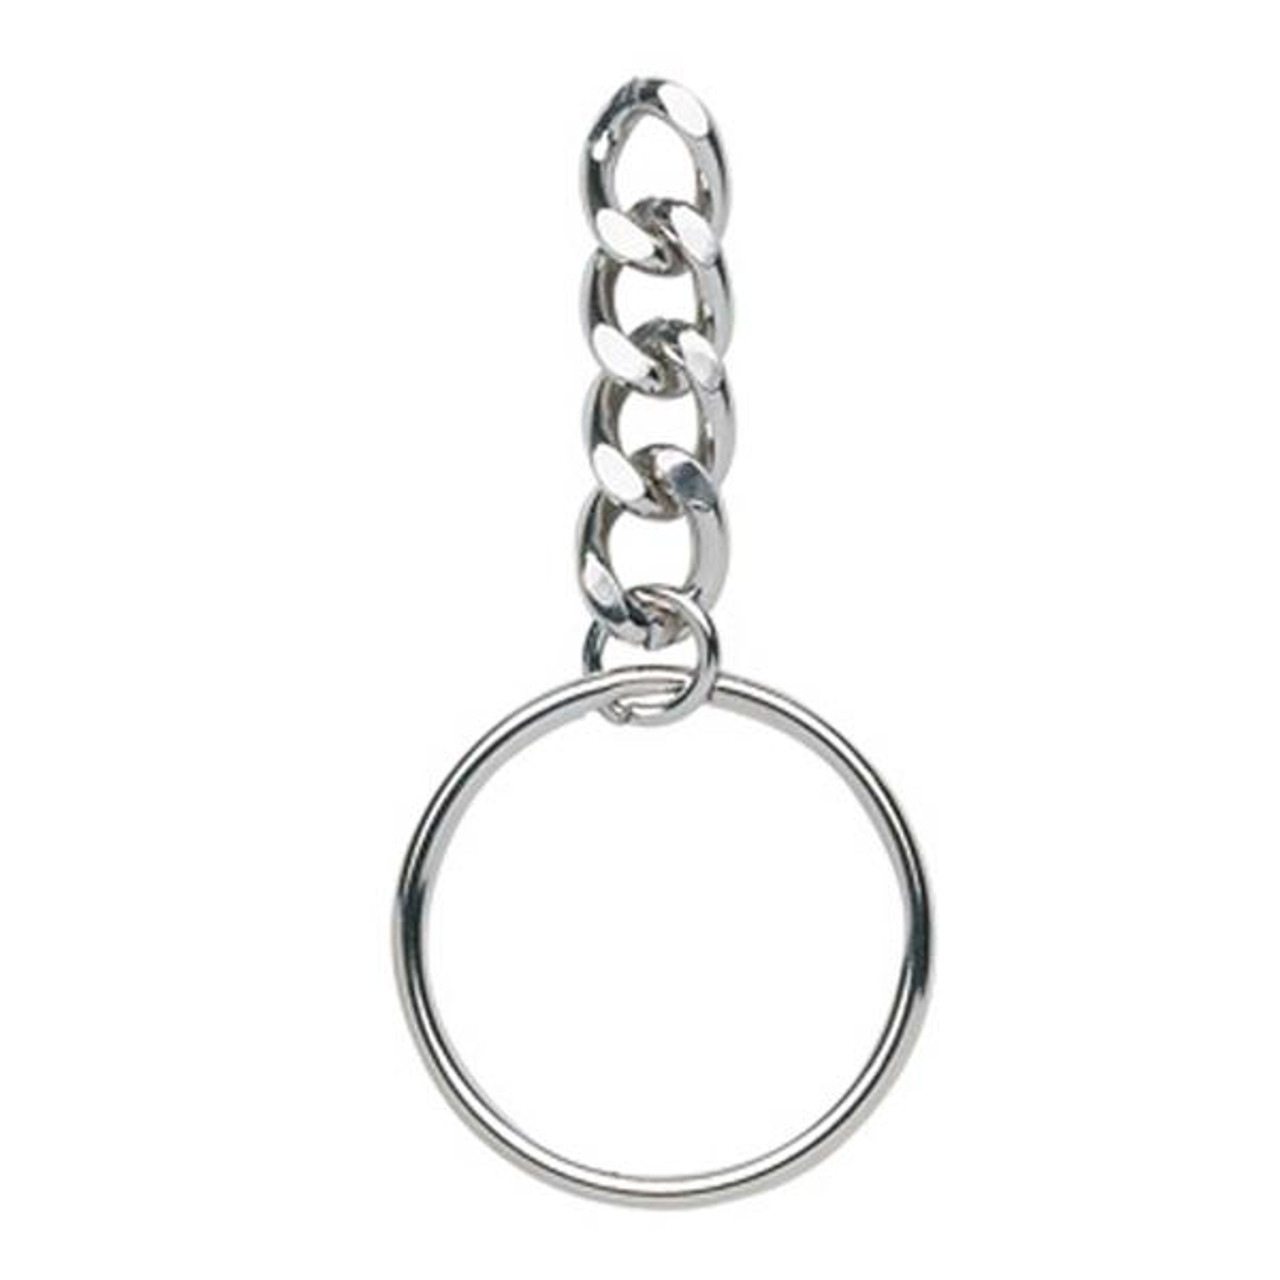 100 Ball Chains & 100 24mm Split Rings for Keychains